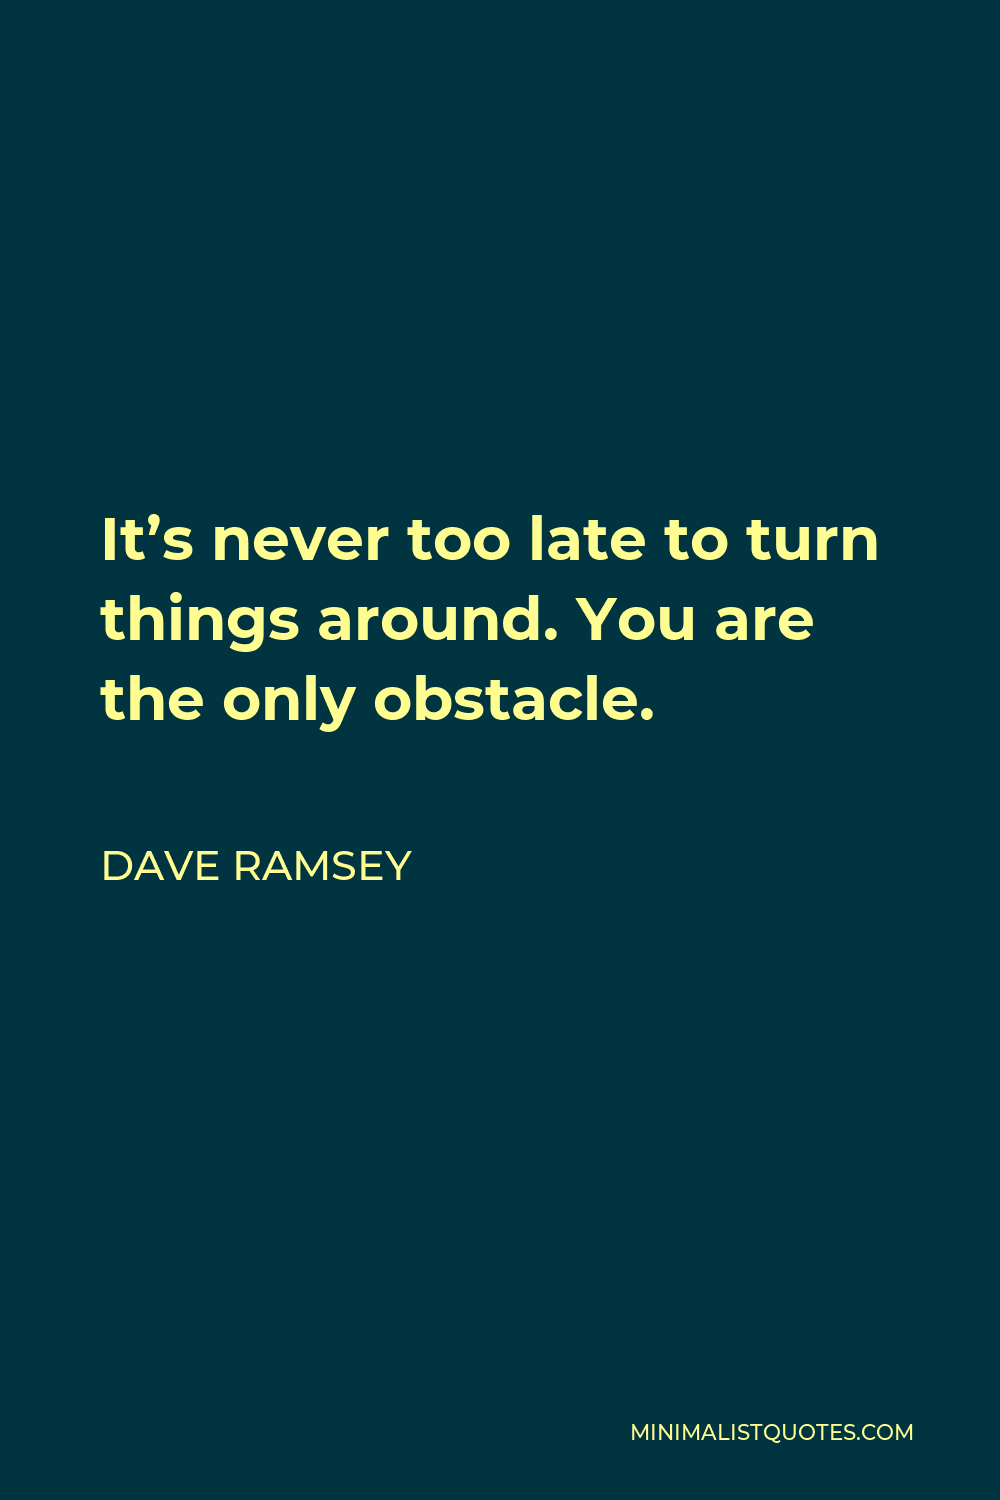 Dave Ramsey Quote - It’s never too late to turn things around. You are the only obstacle.